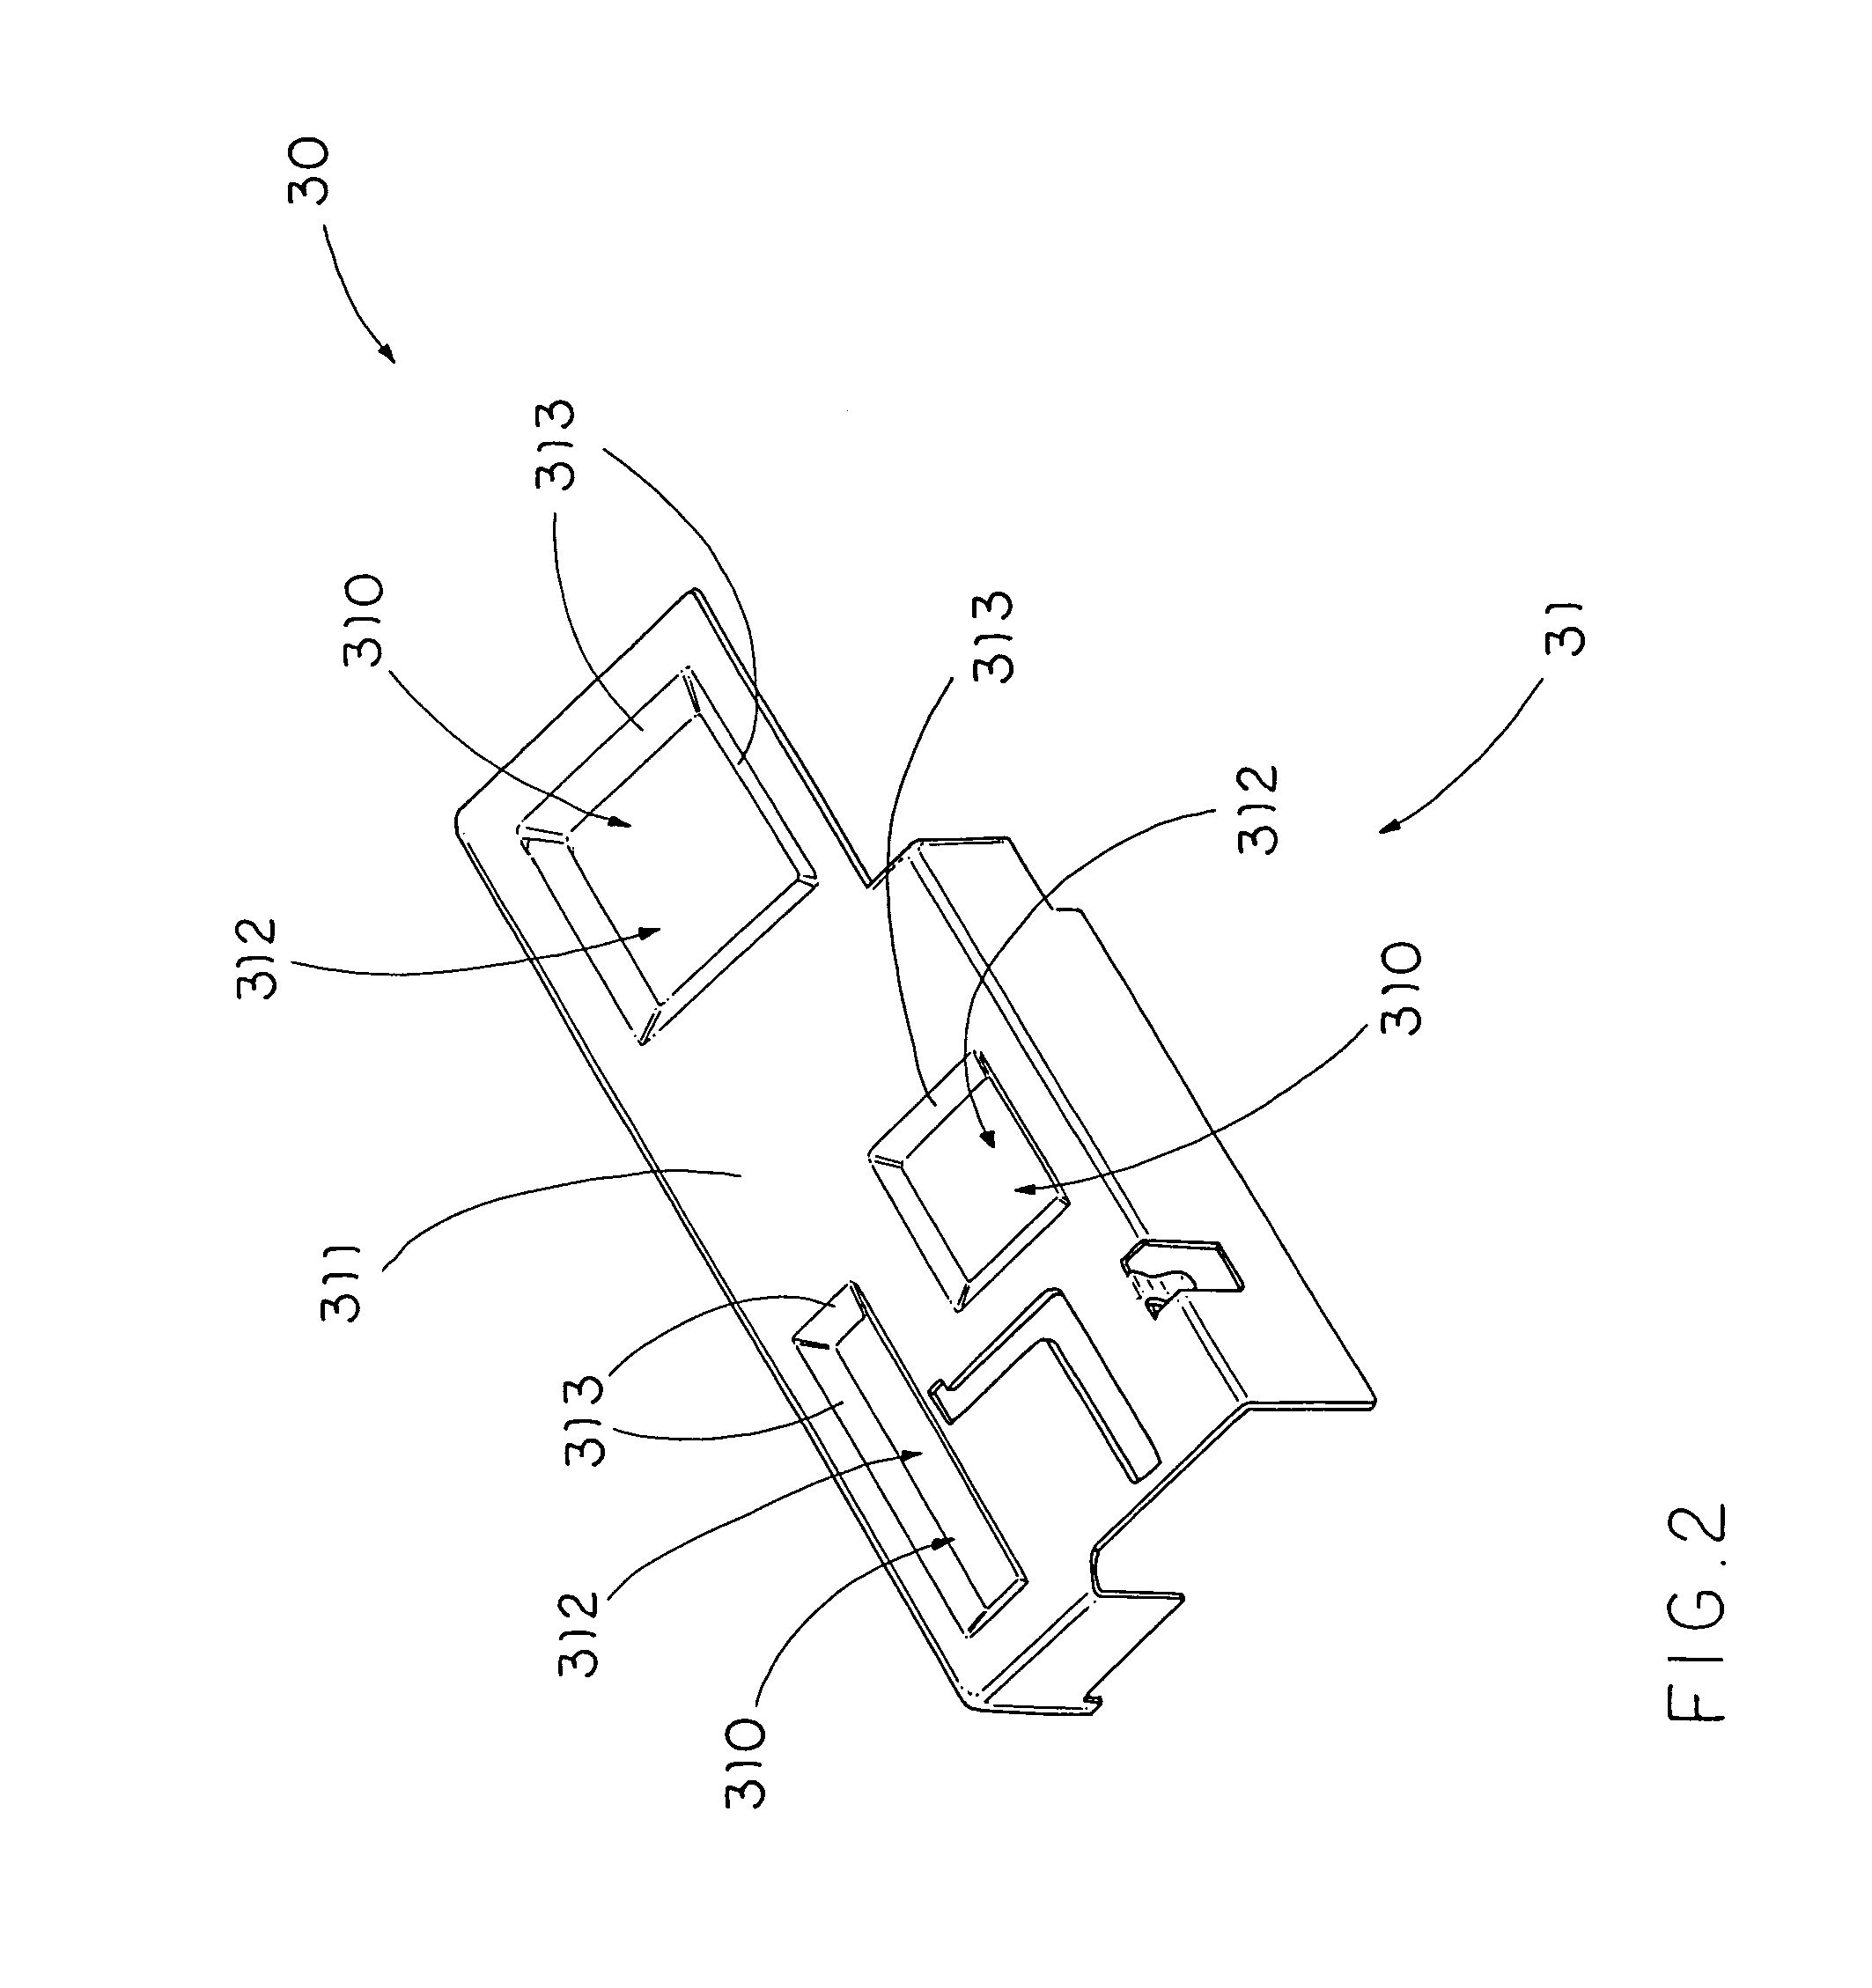 Power adapter with heat sink device